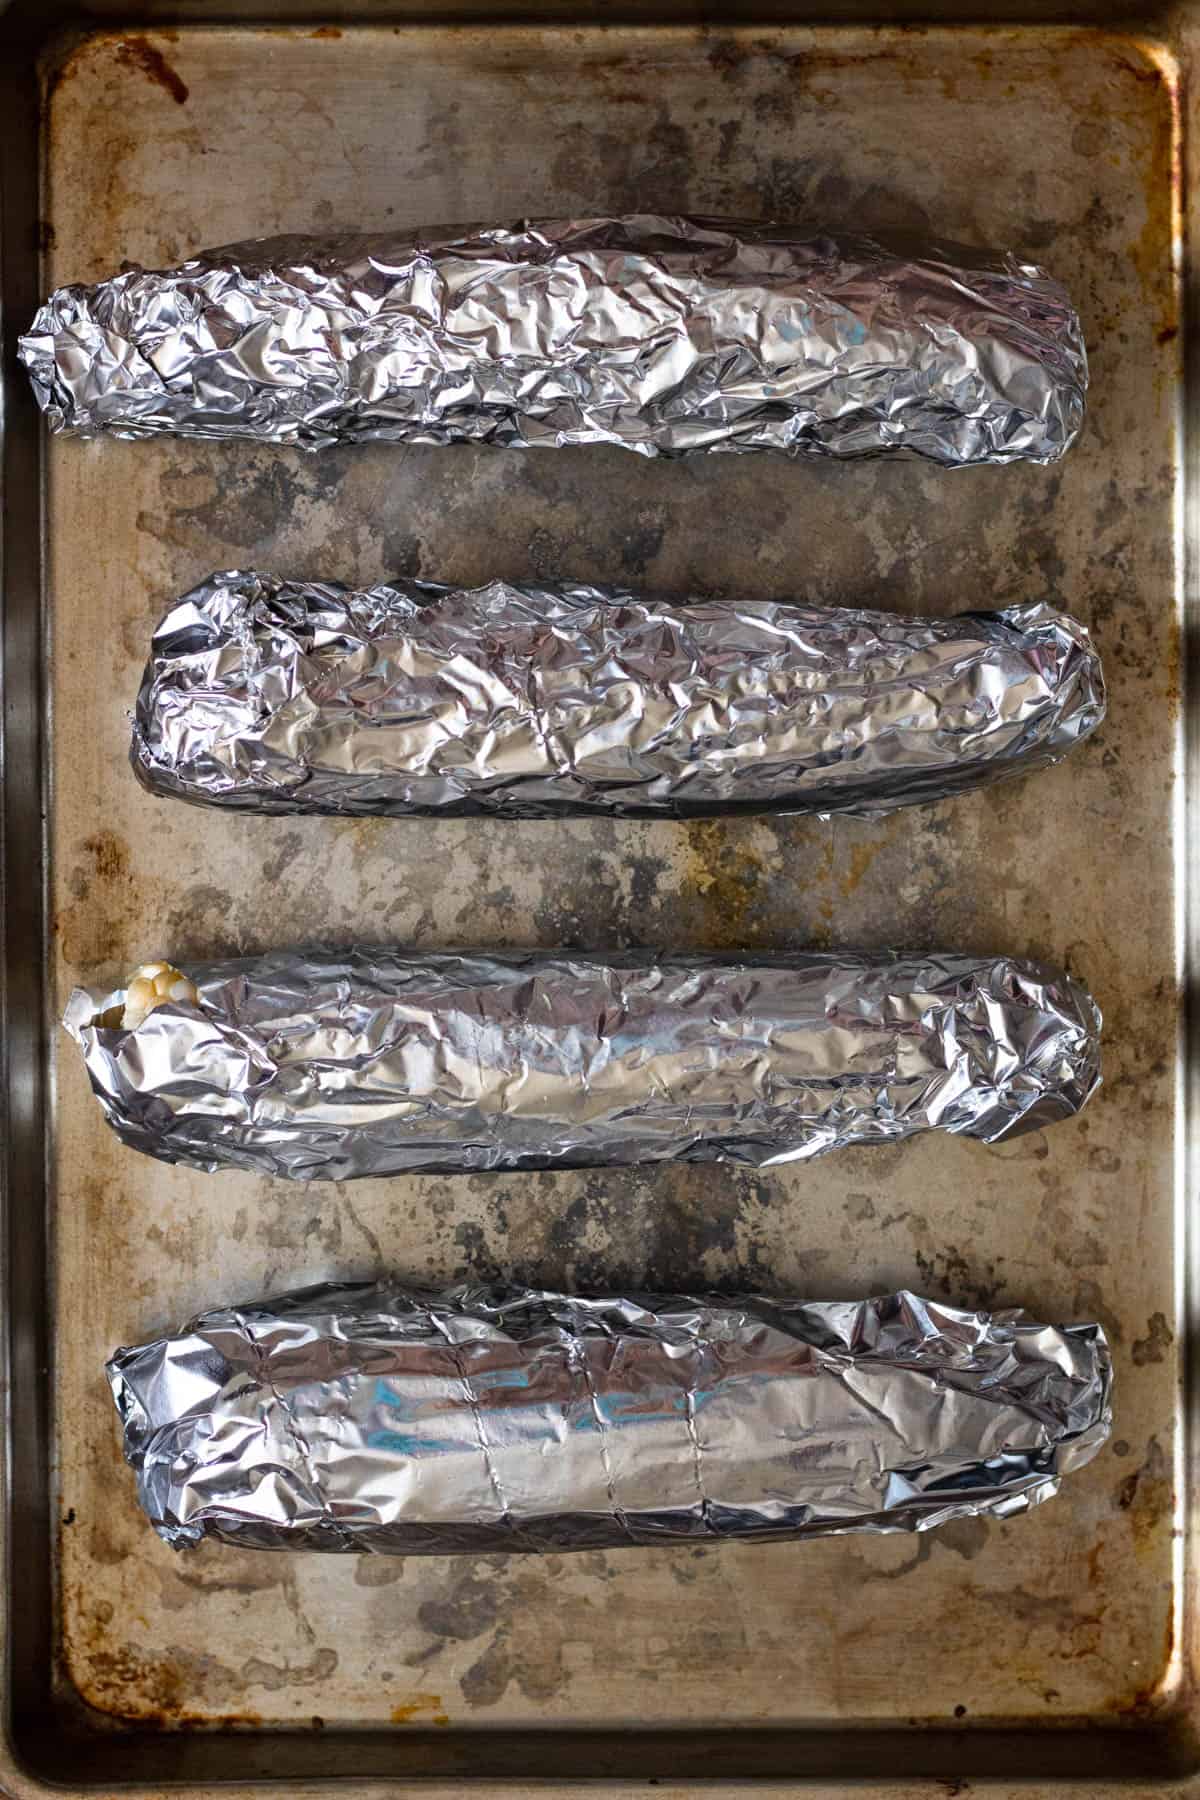 4 ears of corn wrapped in tin foil